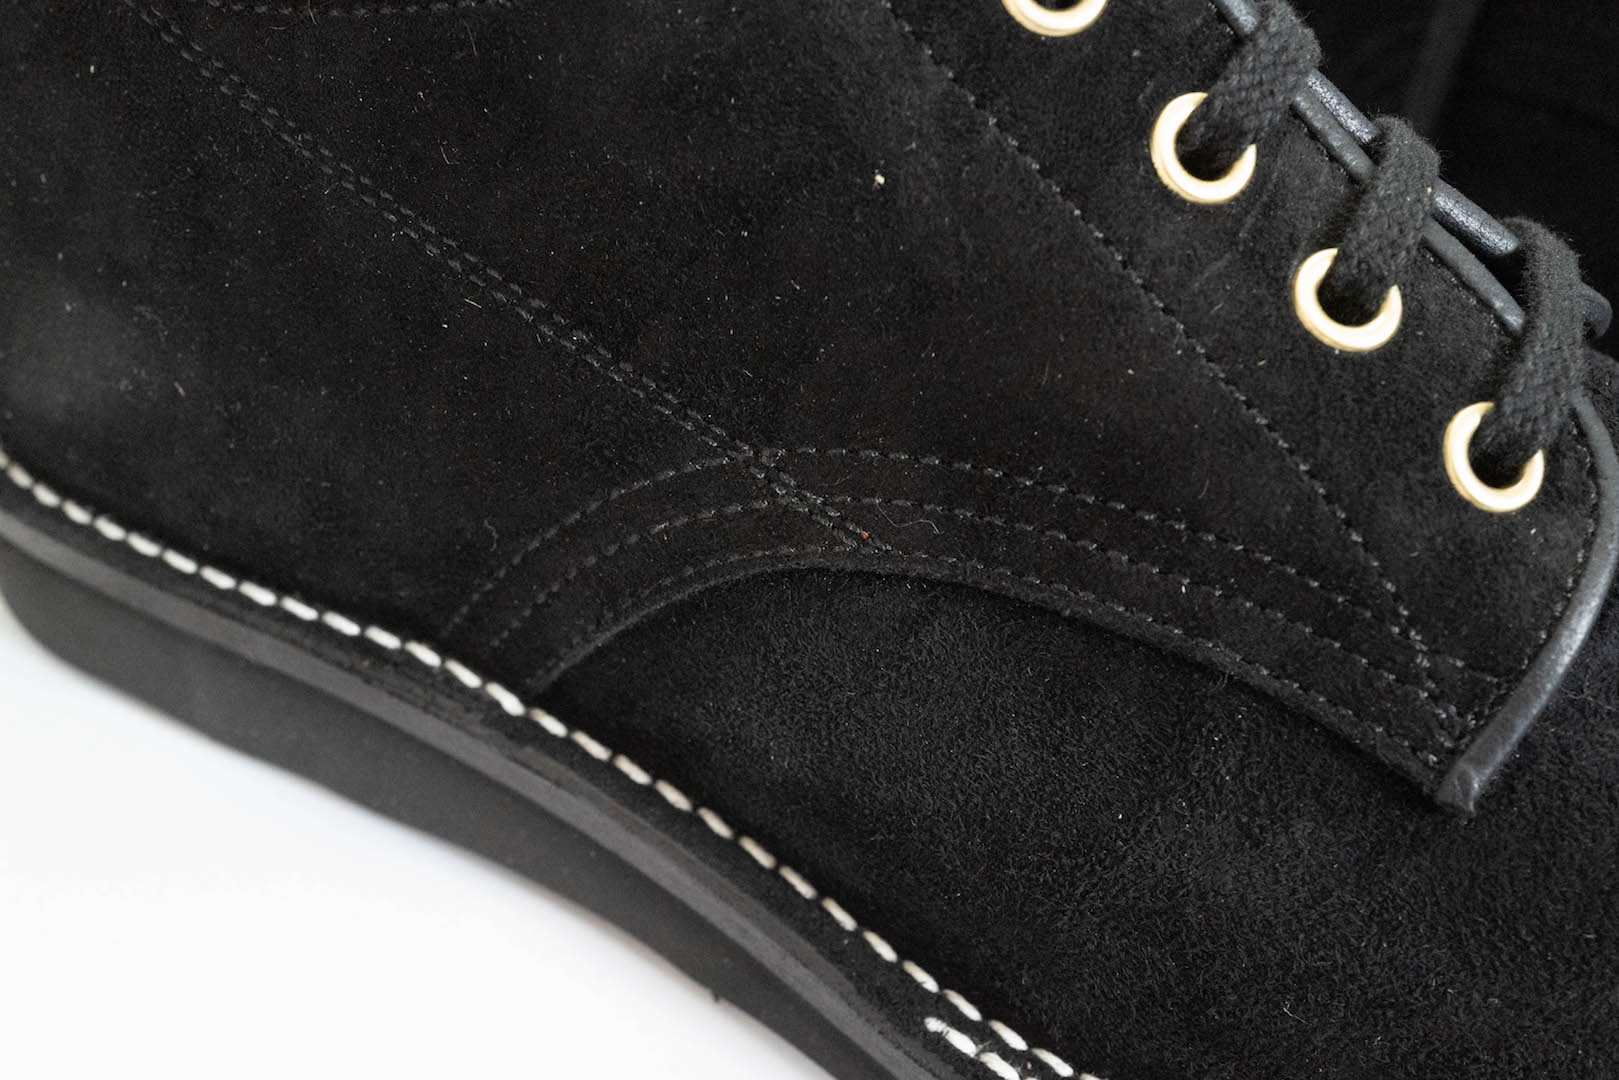 The Flat Head 'Kudu' Suede Oxford Shoes (Black)